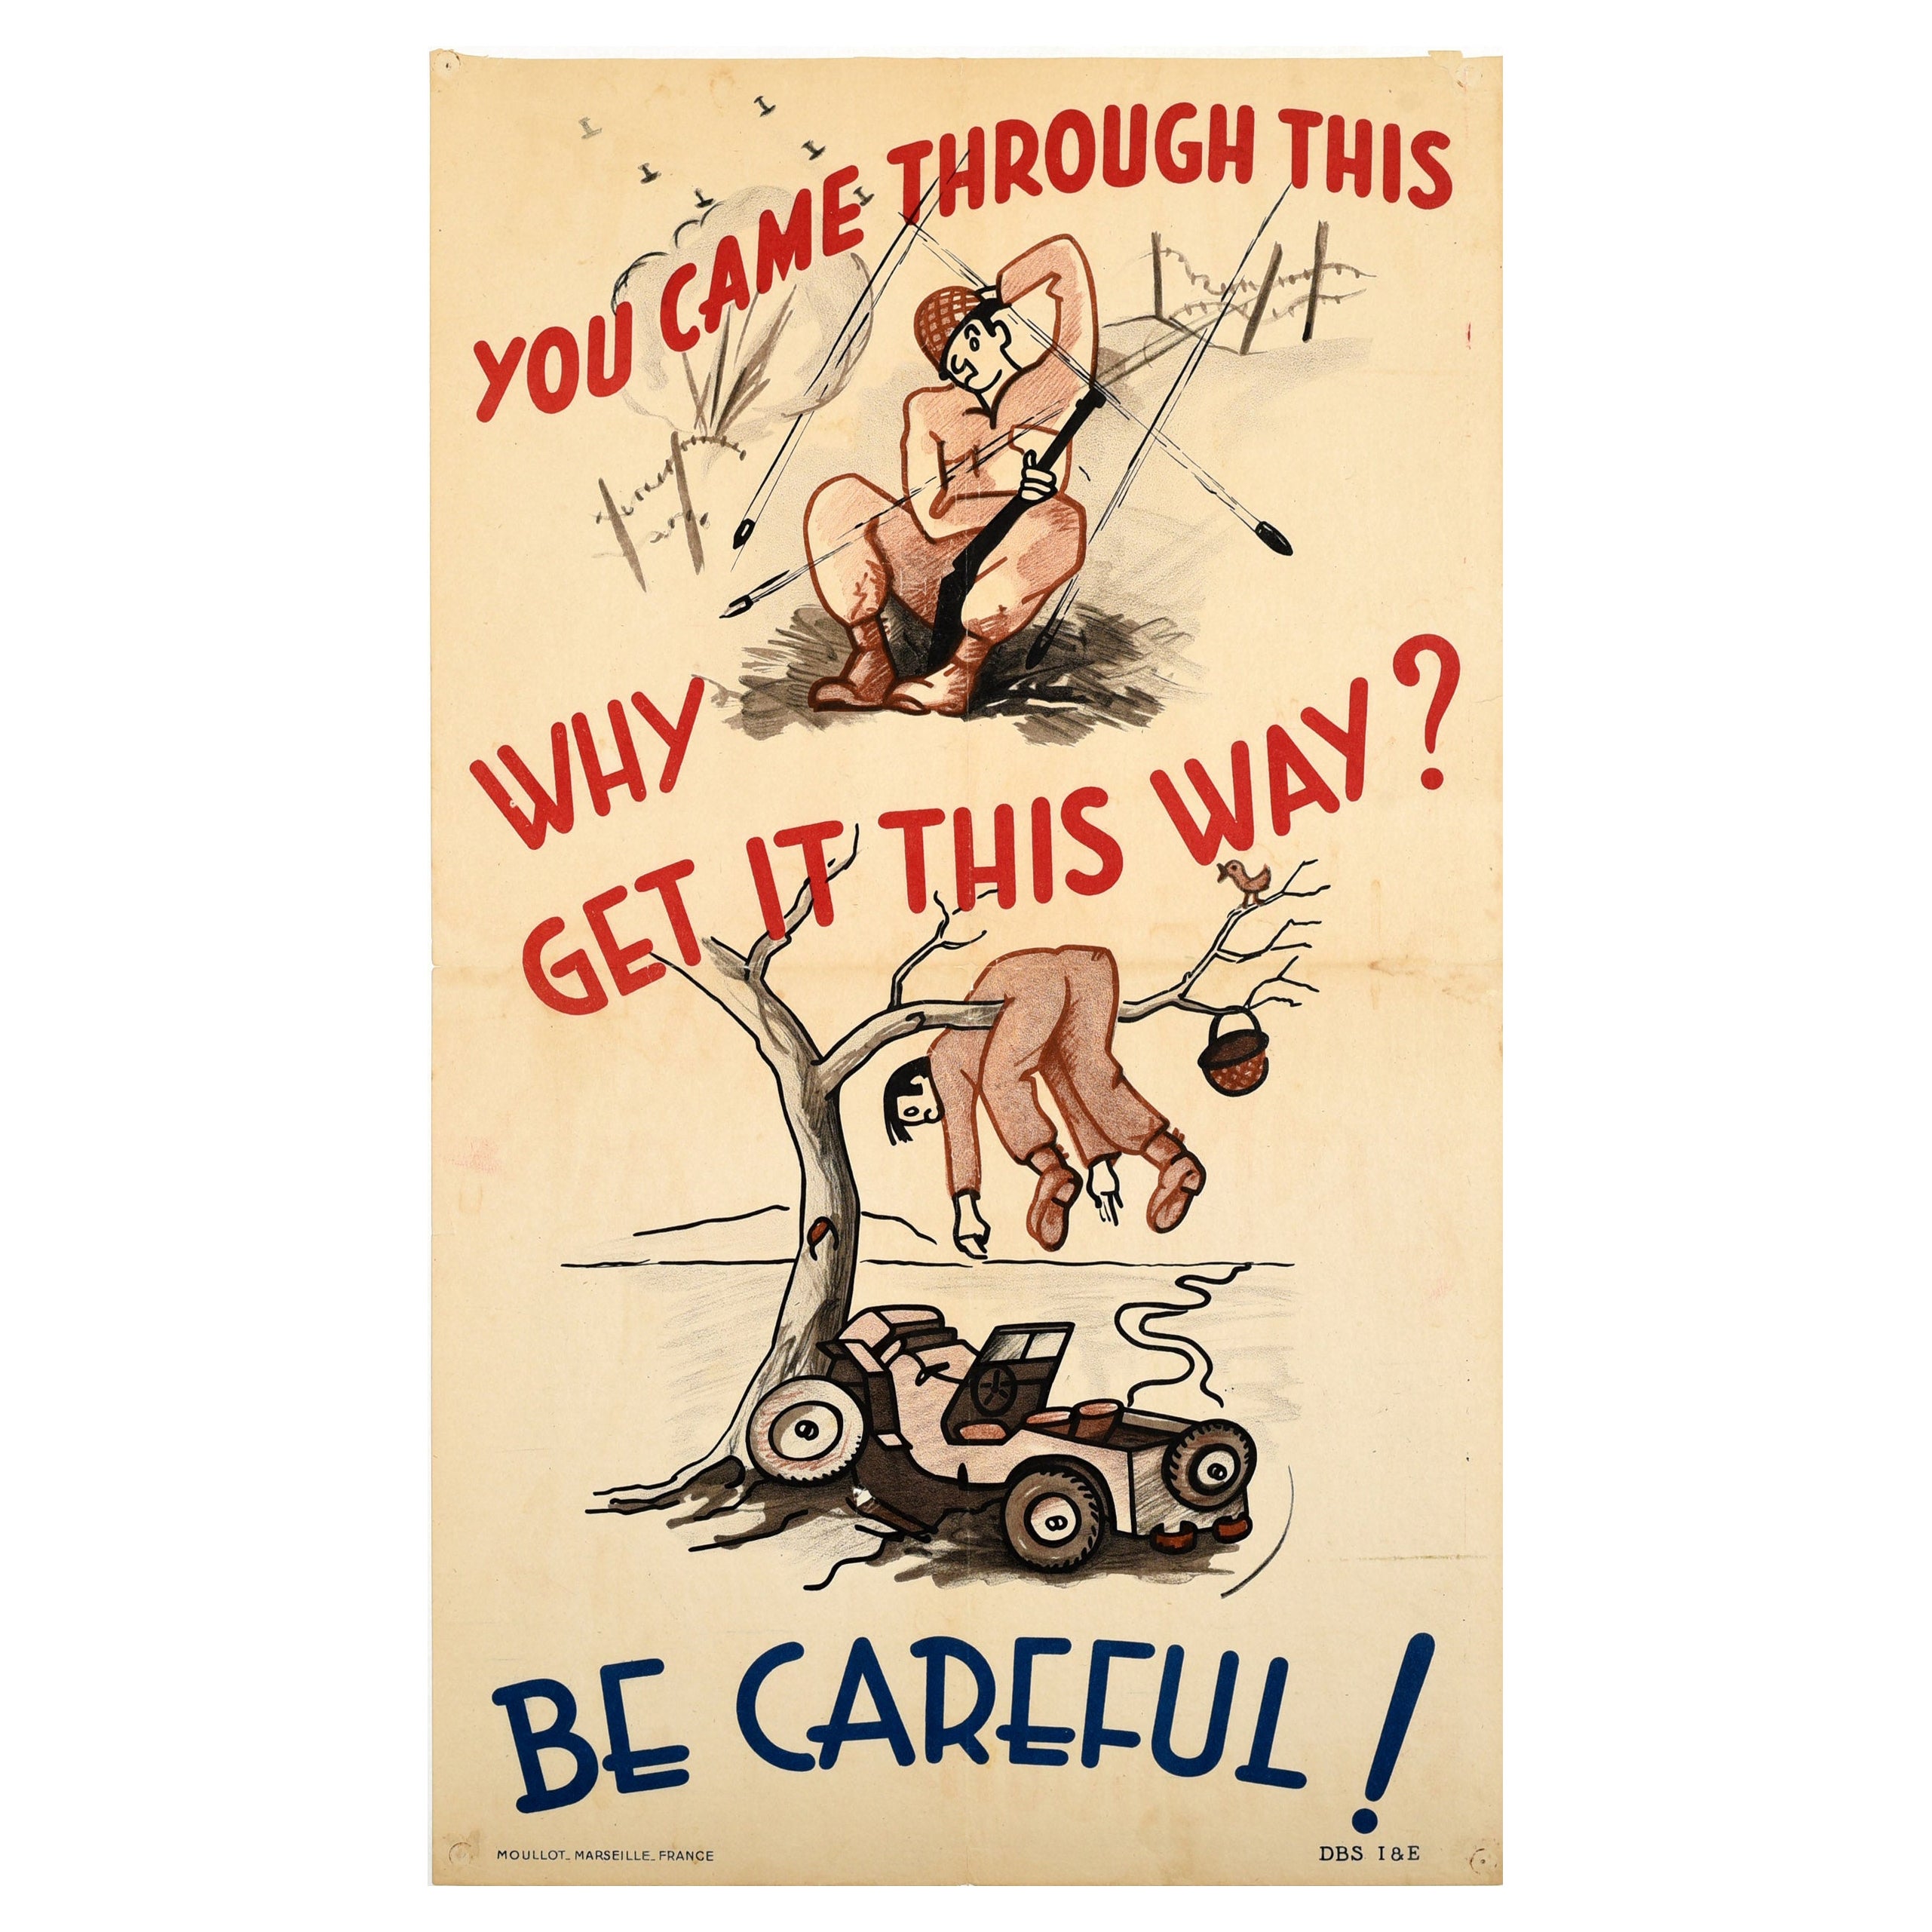 Original Vintage Warning Poster Be Careful Army Road Safety WWII Military Jeep